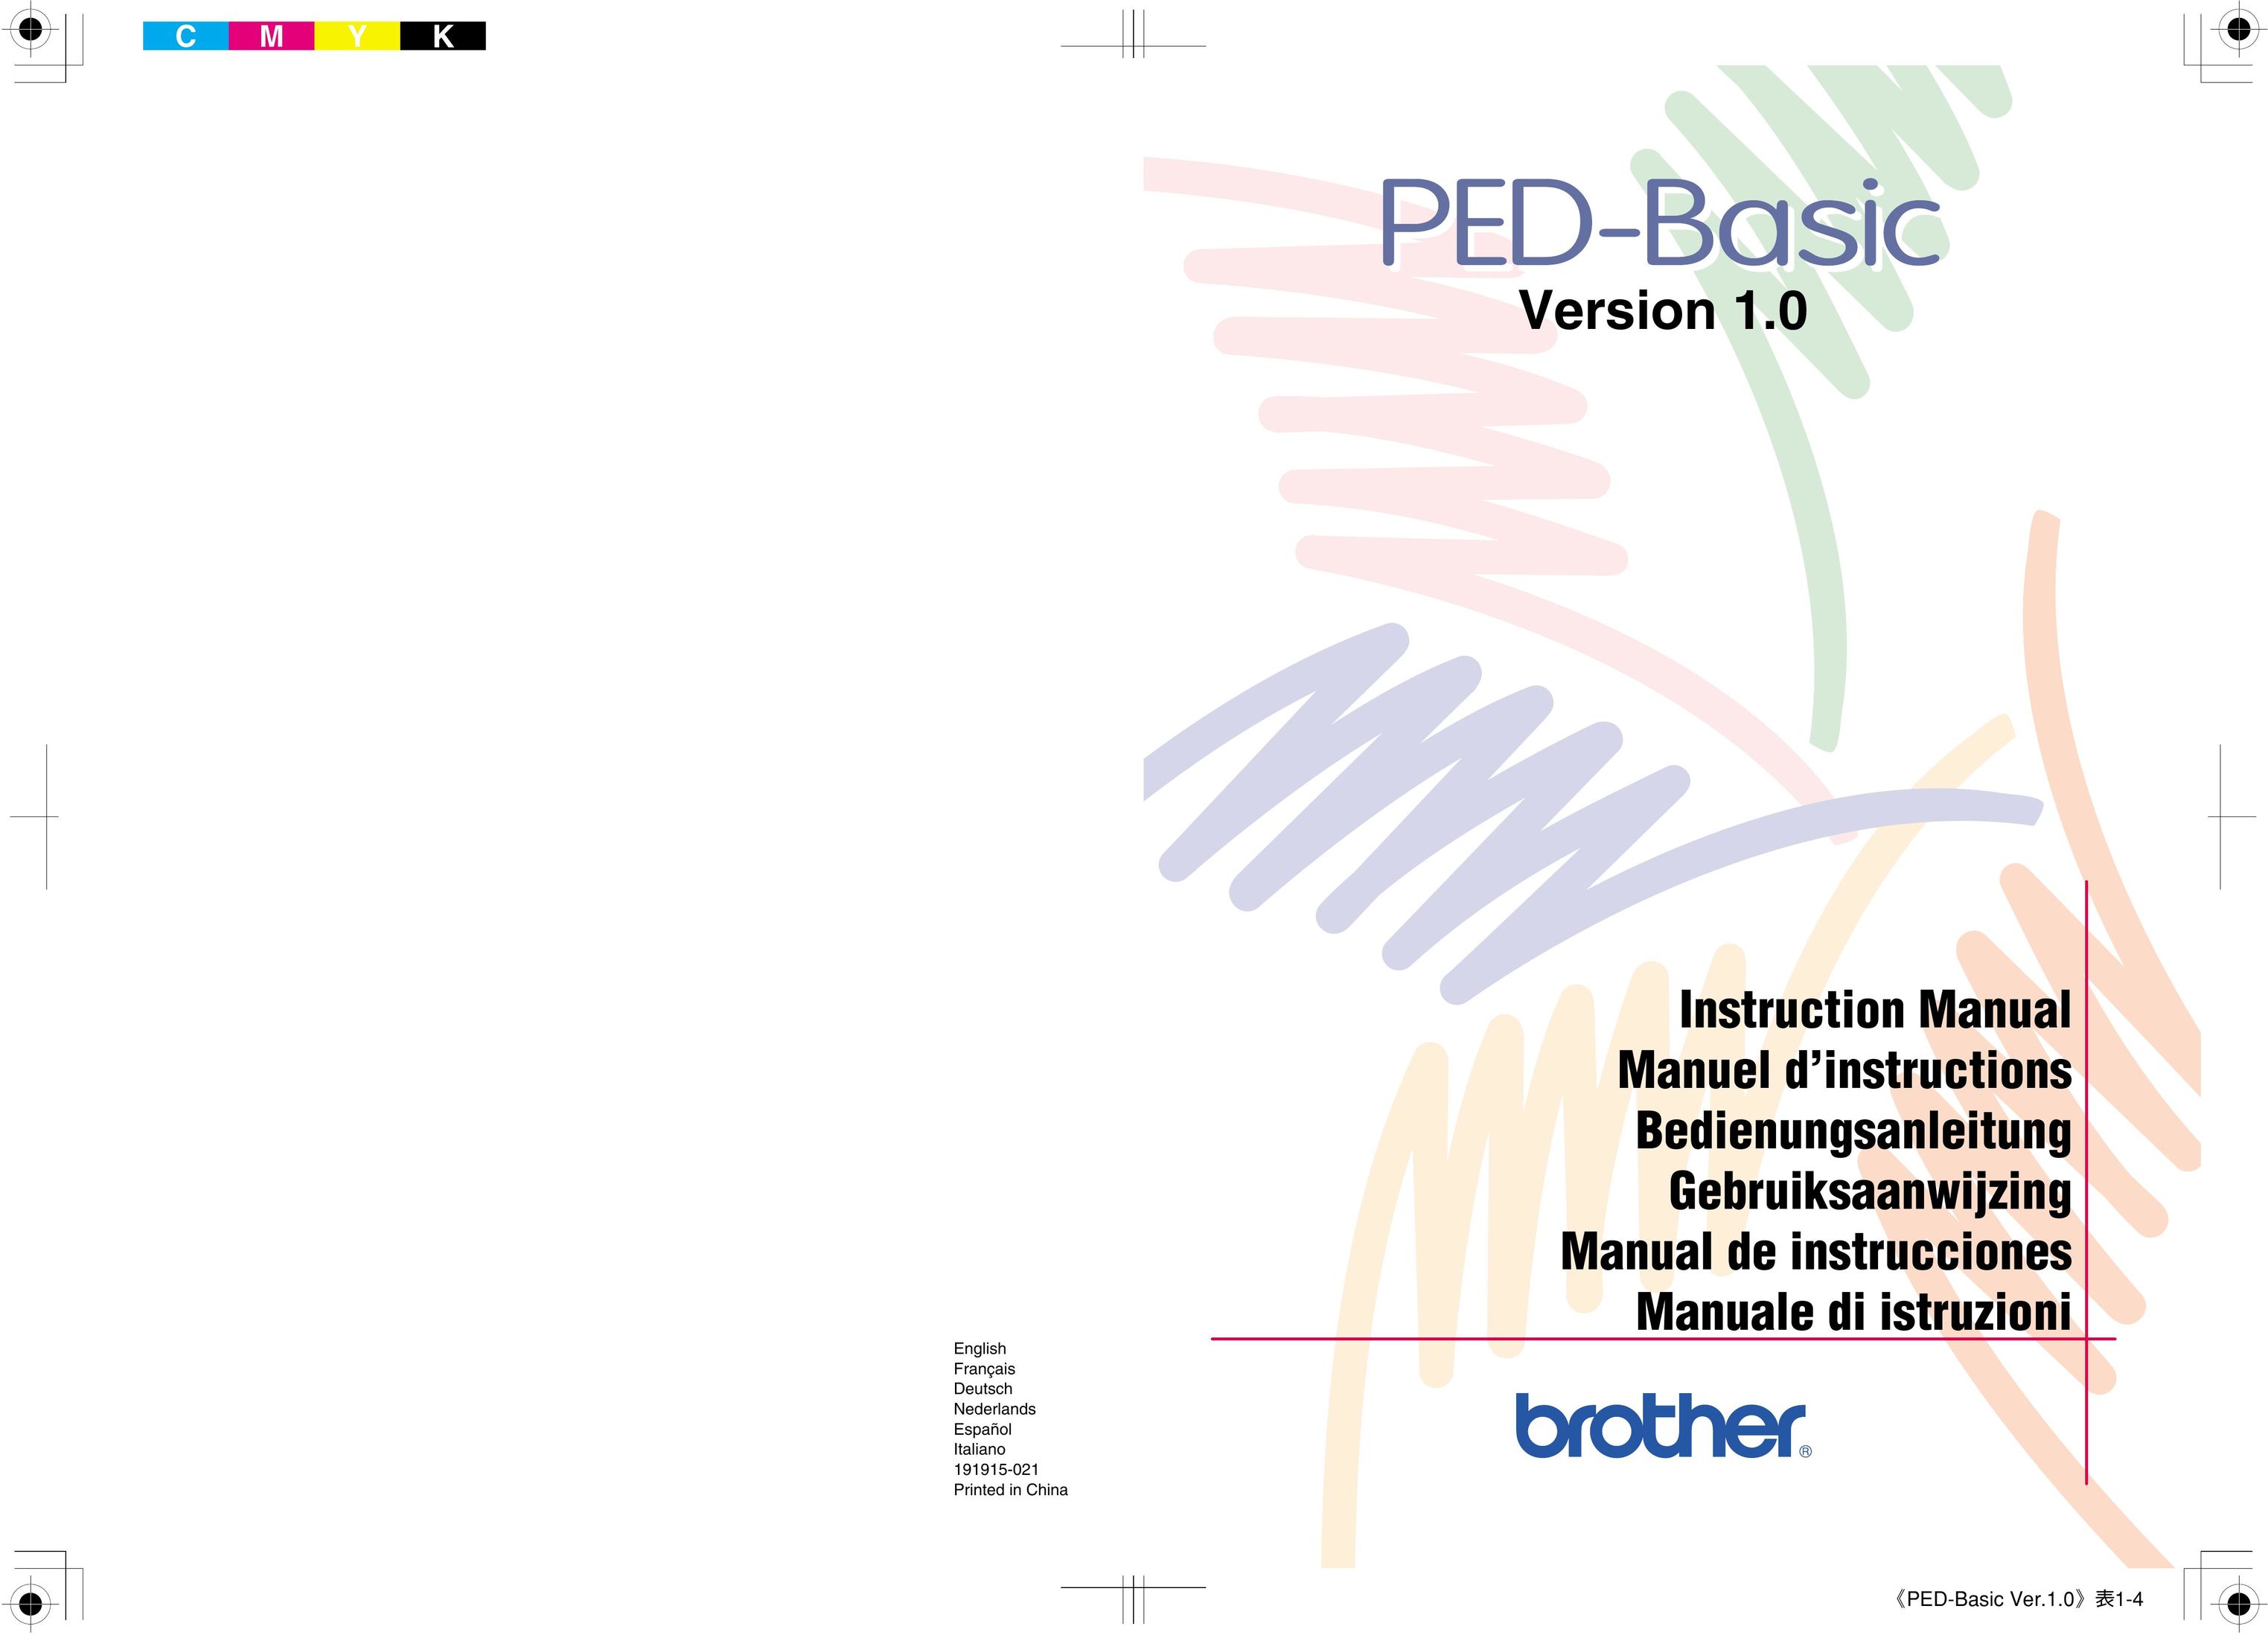 Brother PED Basic Dollhouse User Manual